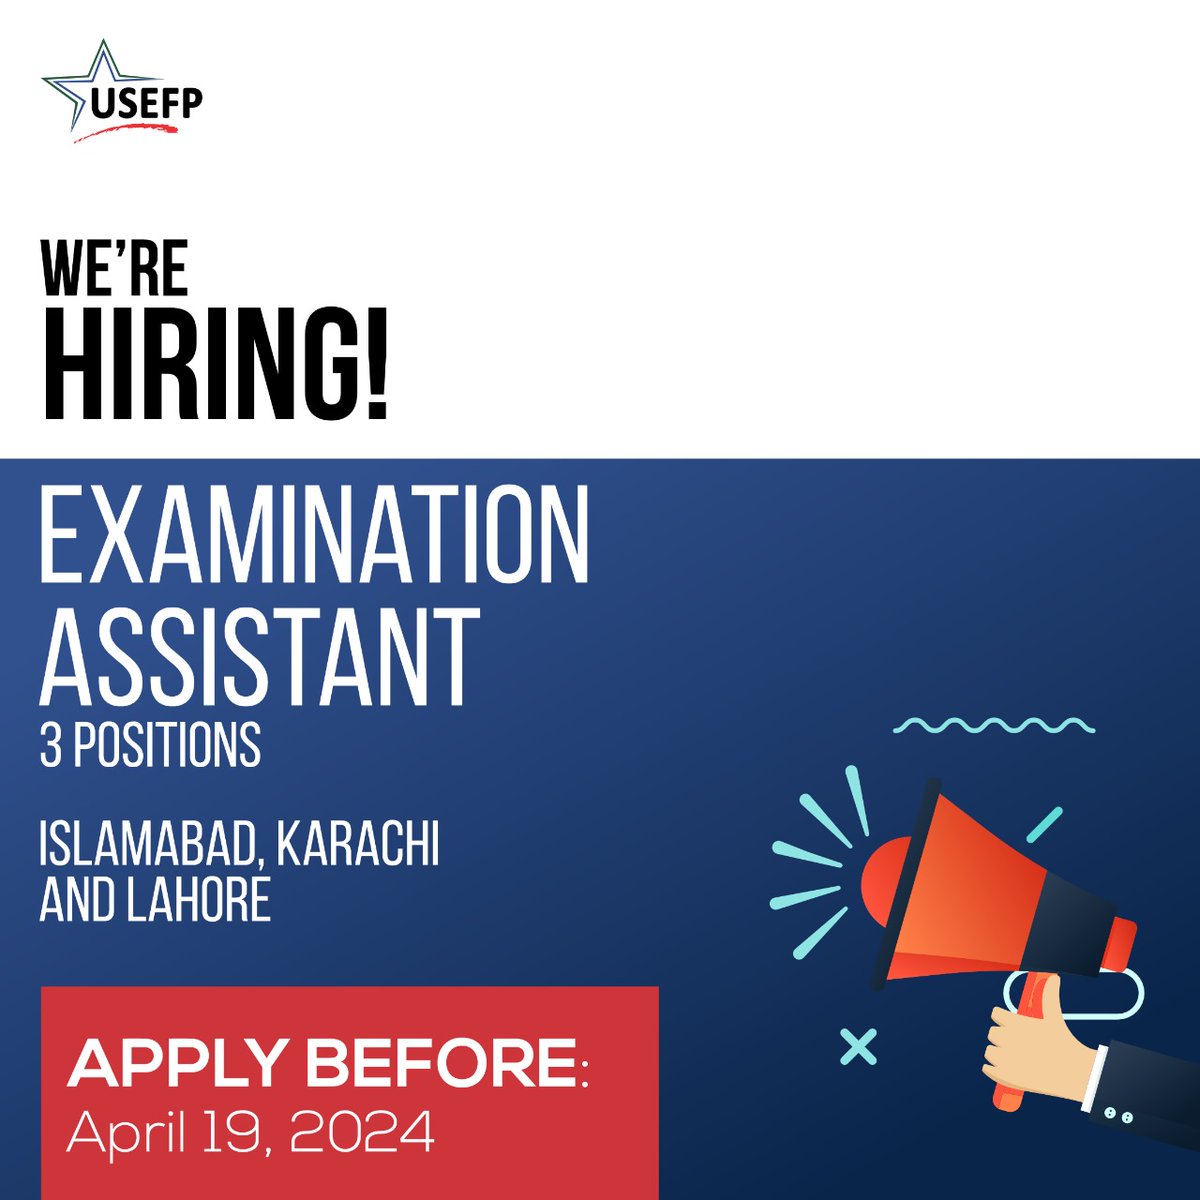 We’re hiring! USEFP has vacancies for Examination Assistant positions, one each in Islamabad, Karachi, and Lahore. Apply before: April 19, 2024! To apply, visit bit.ly/4apBuAu #USEFP #Vacancy #JobAlert